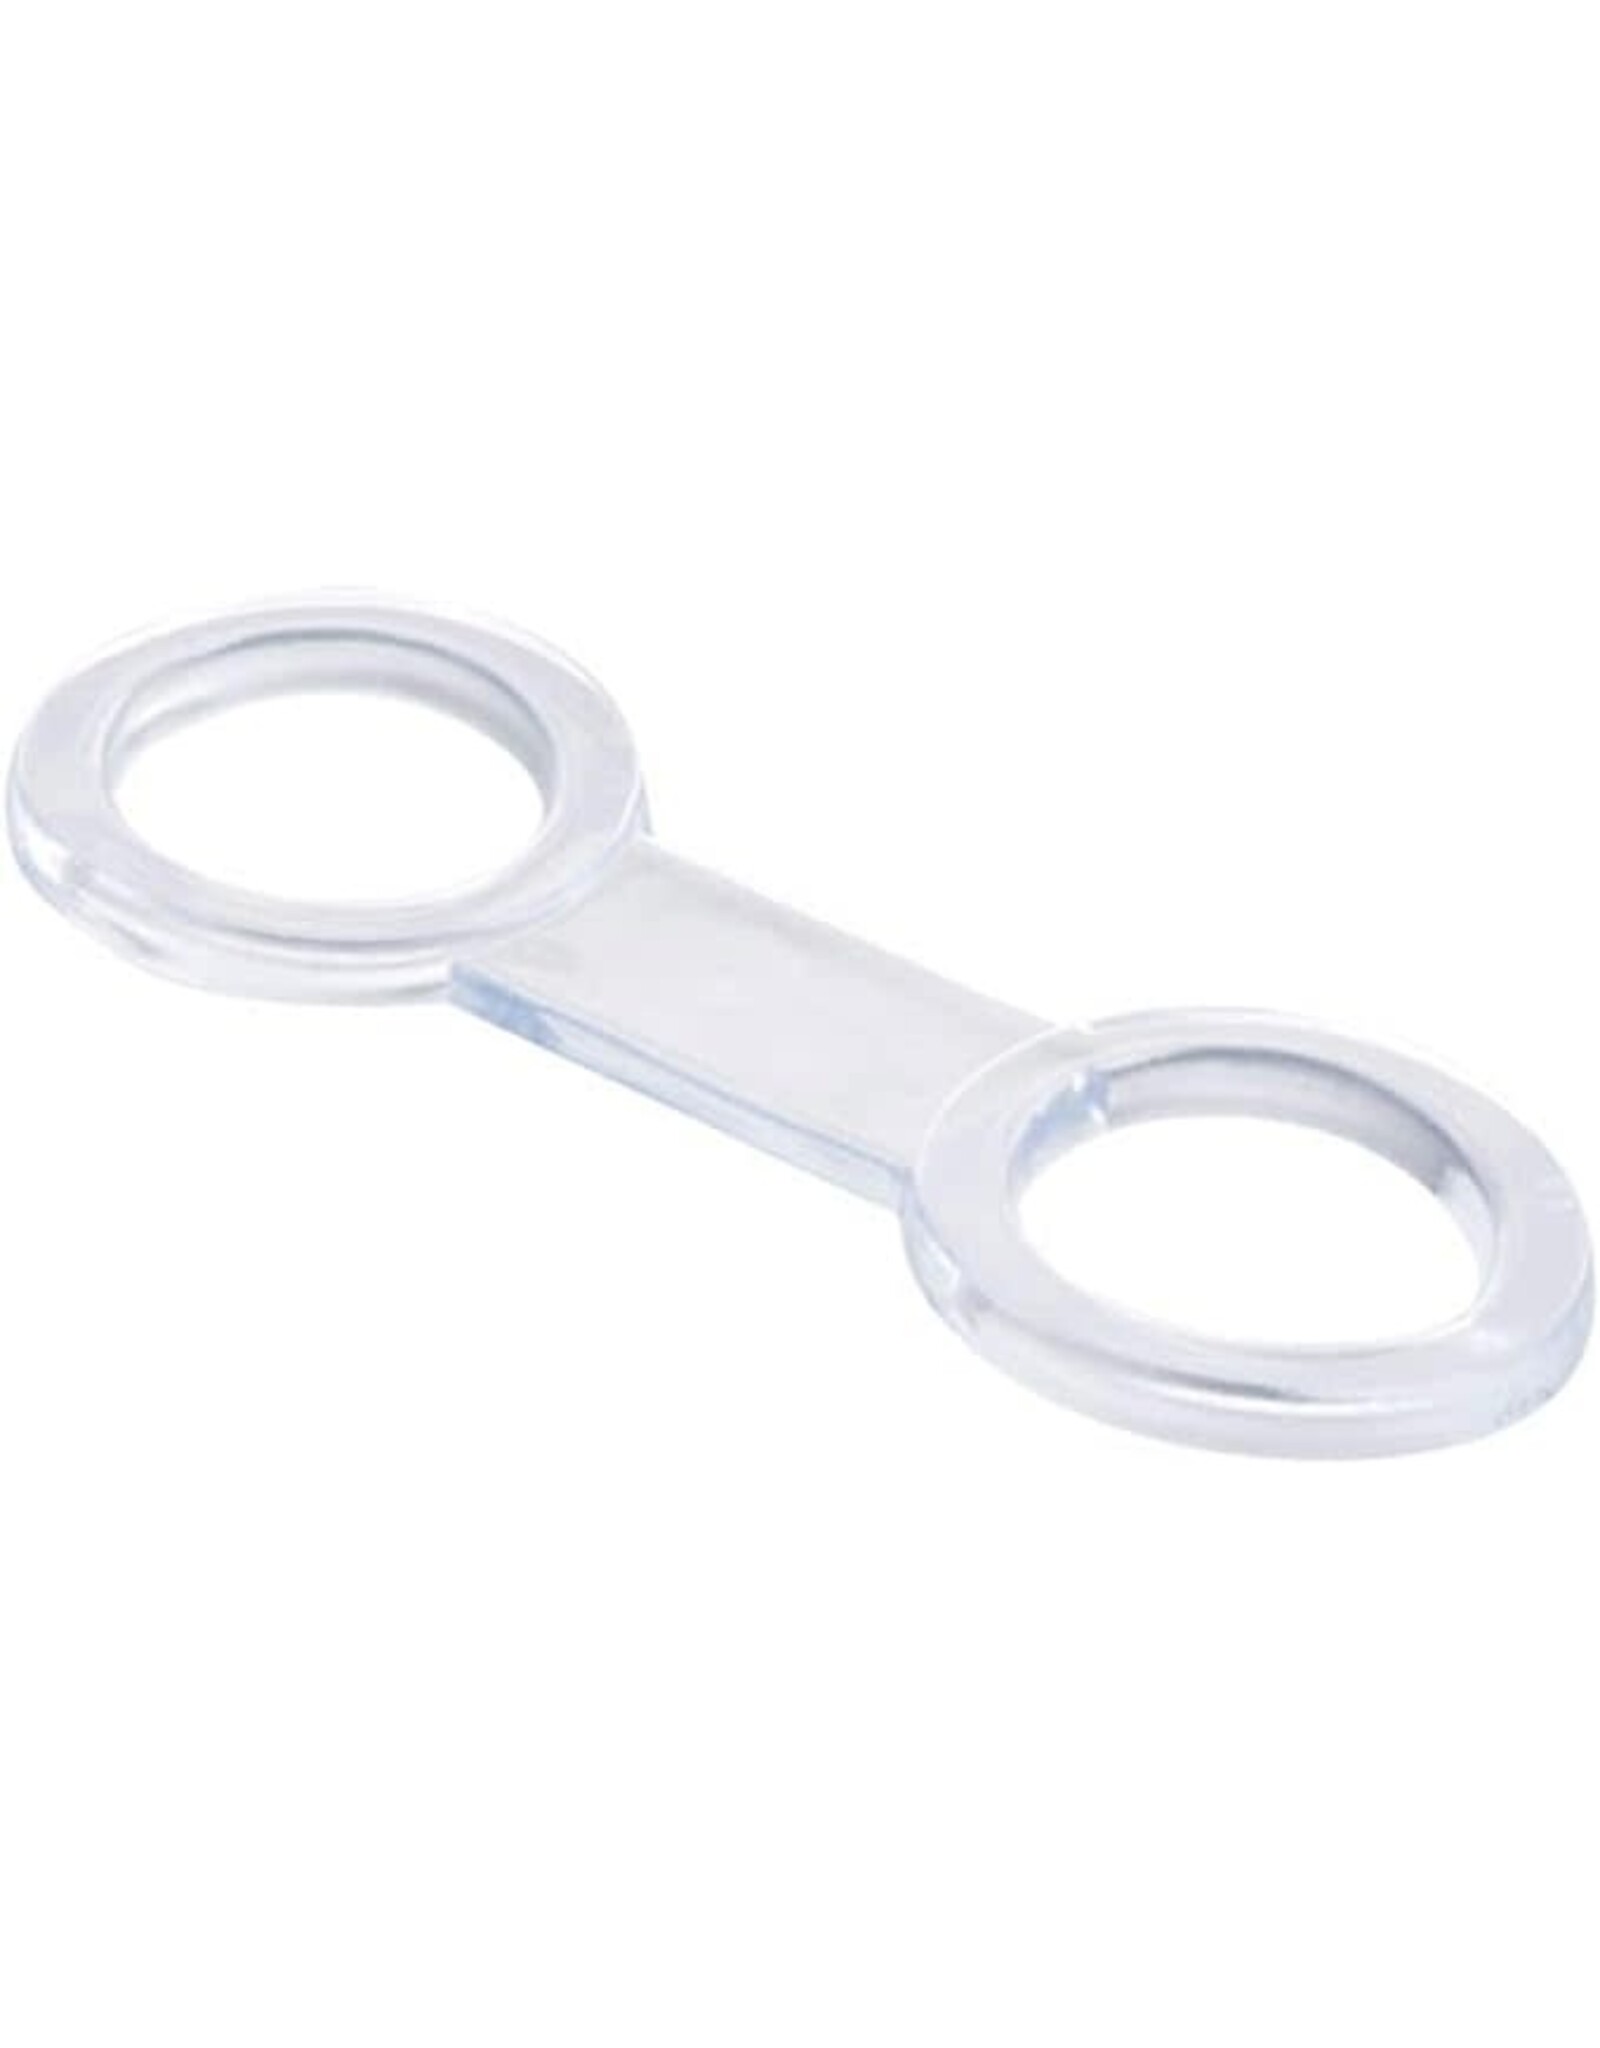 Trident Diving Equipment Trident Clear Silicon Snorkel Keeper